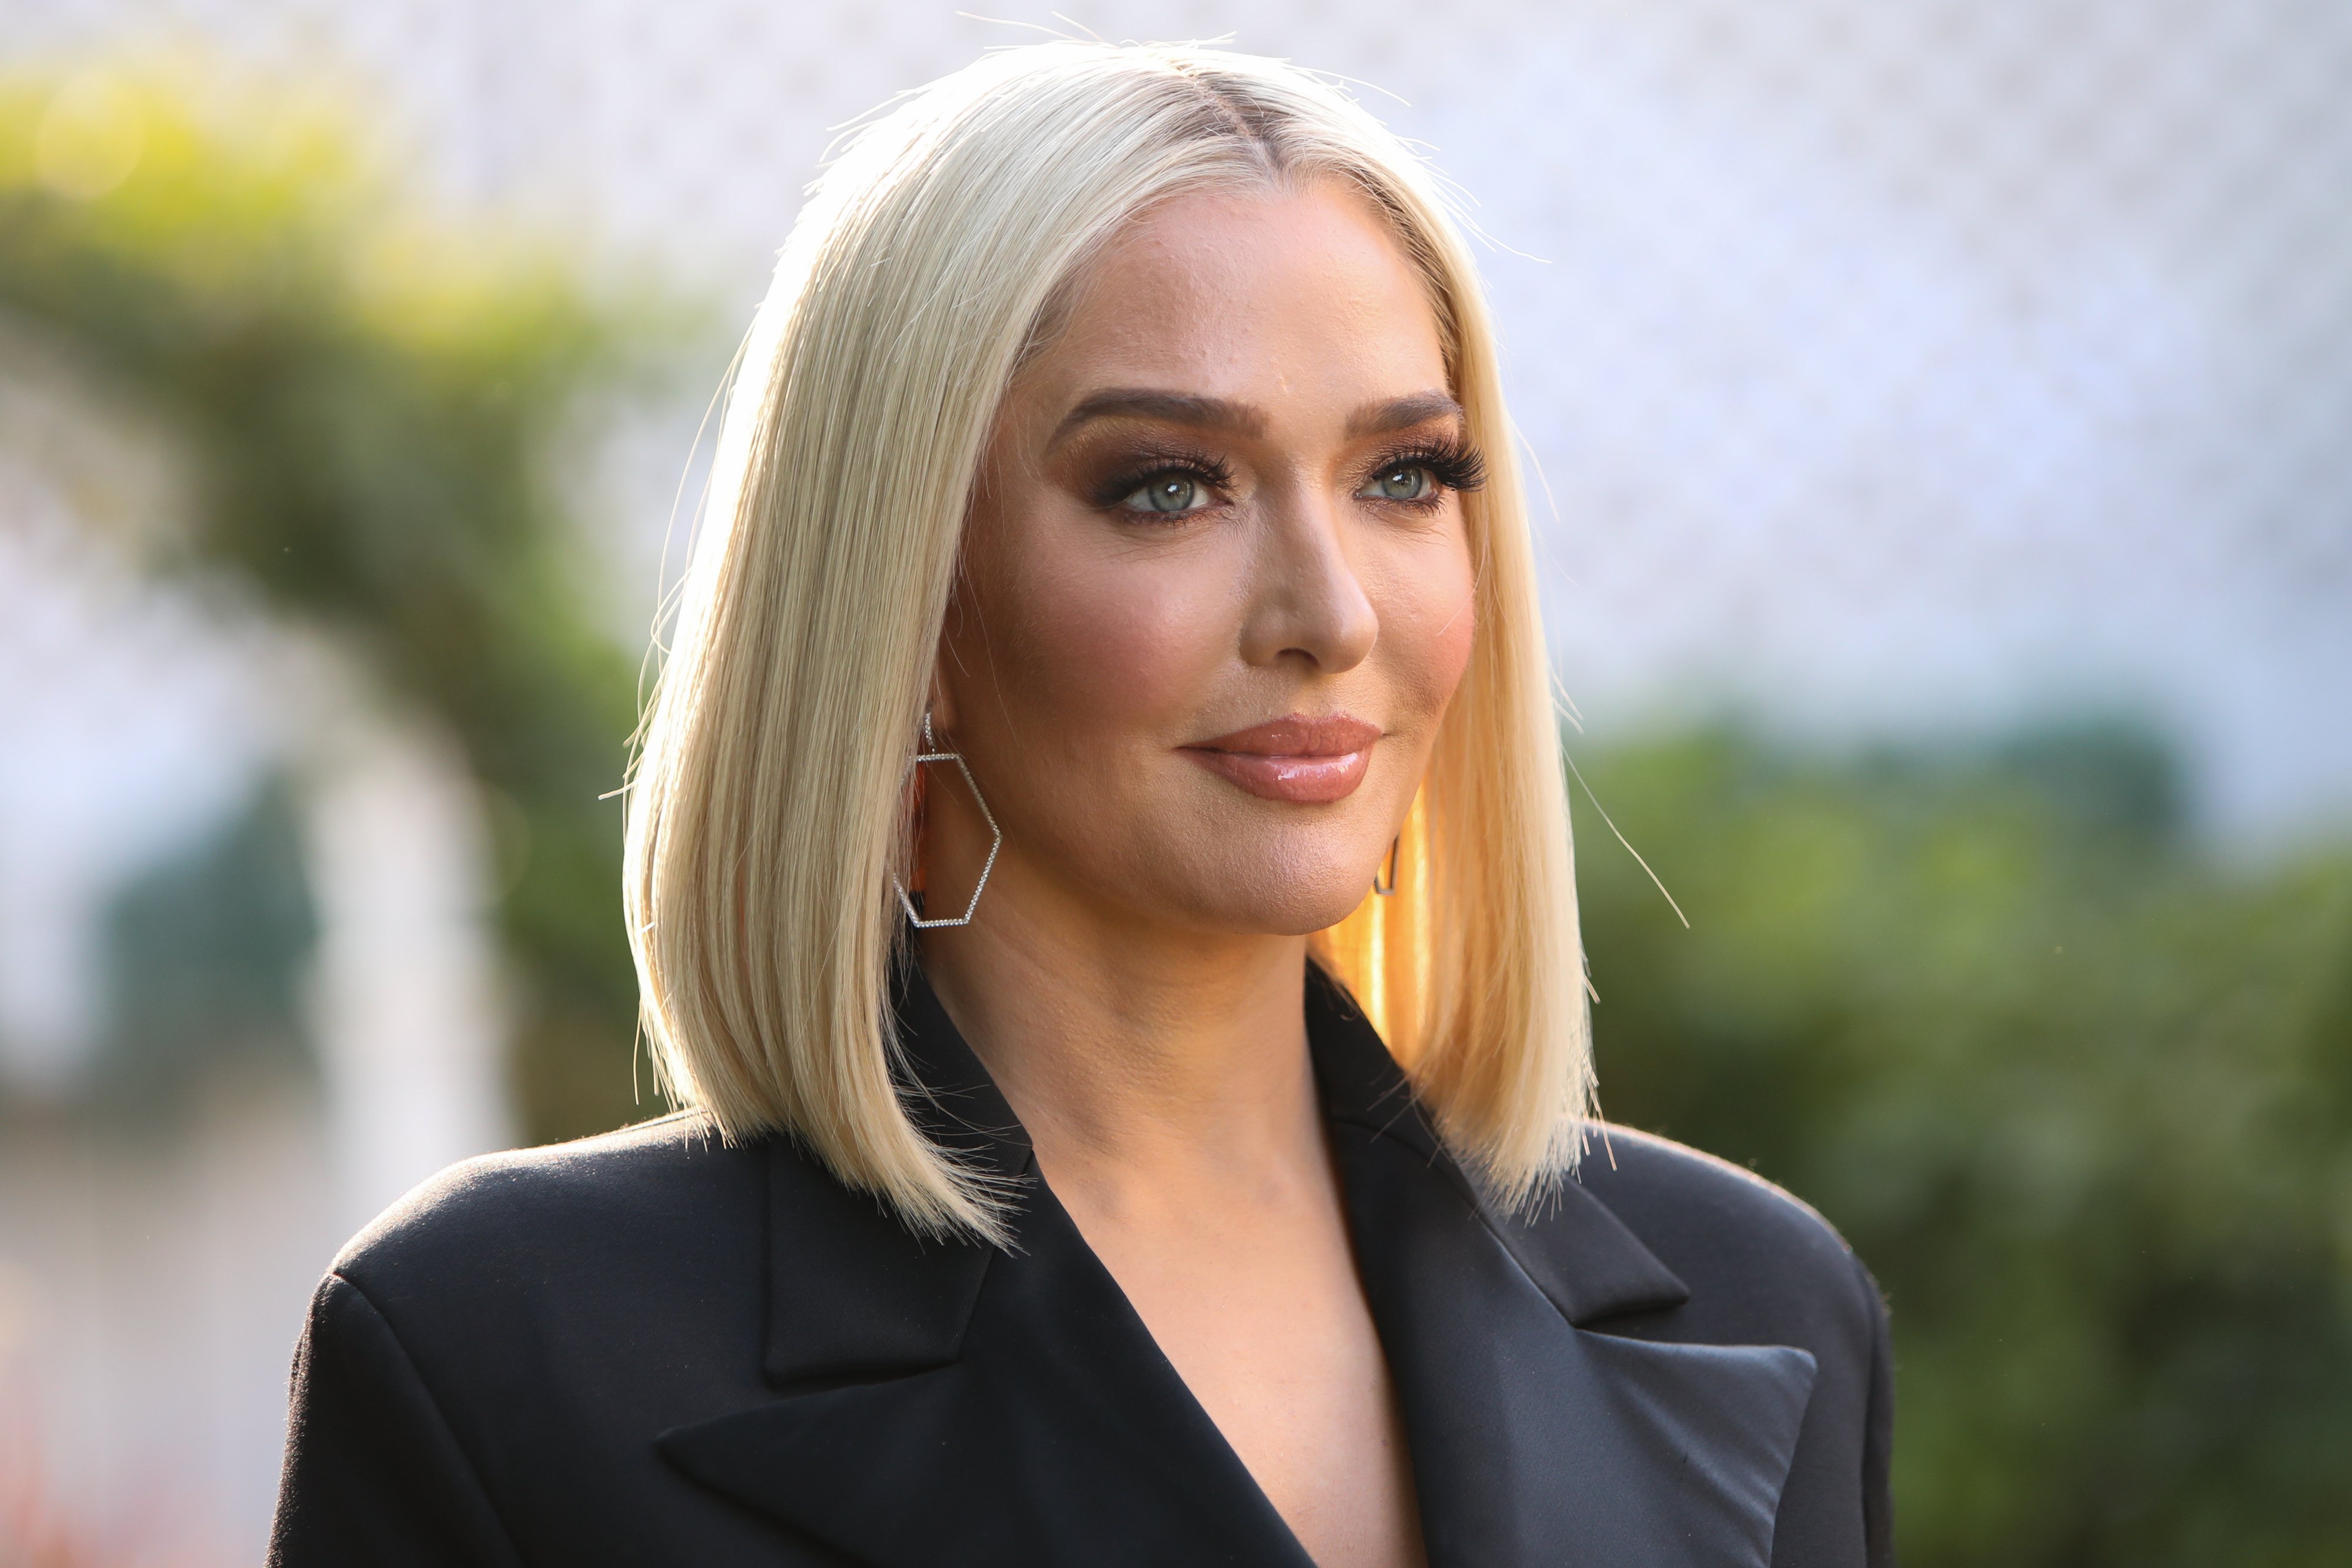 Erika Jayne visits Hallmark Channel's "Home & Family" at Universal Studios Hollywood on November 11, 2019, in Universal City, California. | Source: Getty Images